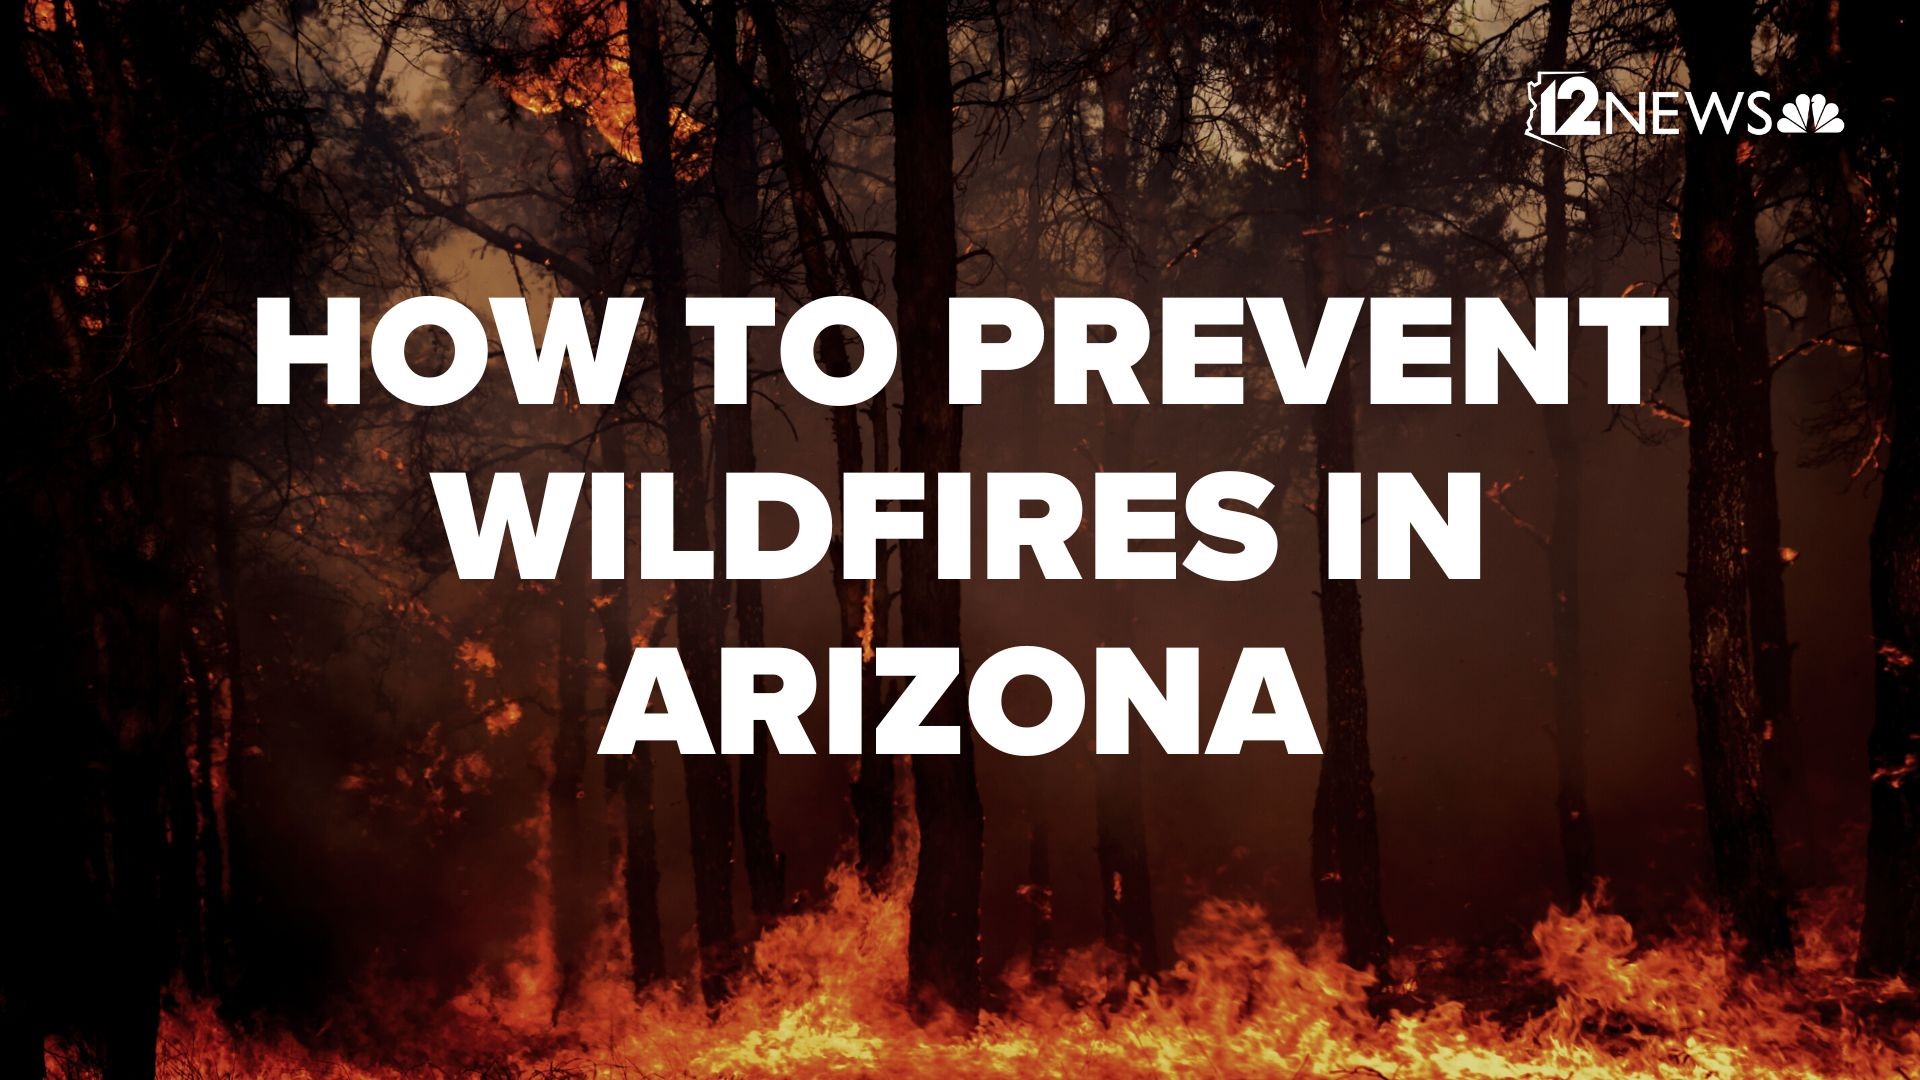 Wildfires in Arizona can be very destructive. Here are five tips on how to prevent them from starting and spreading.